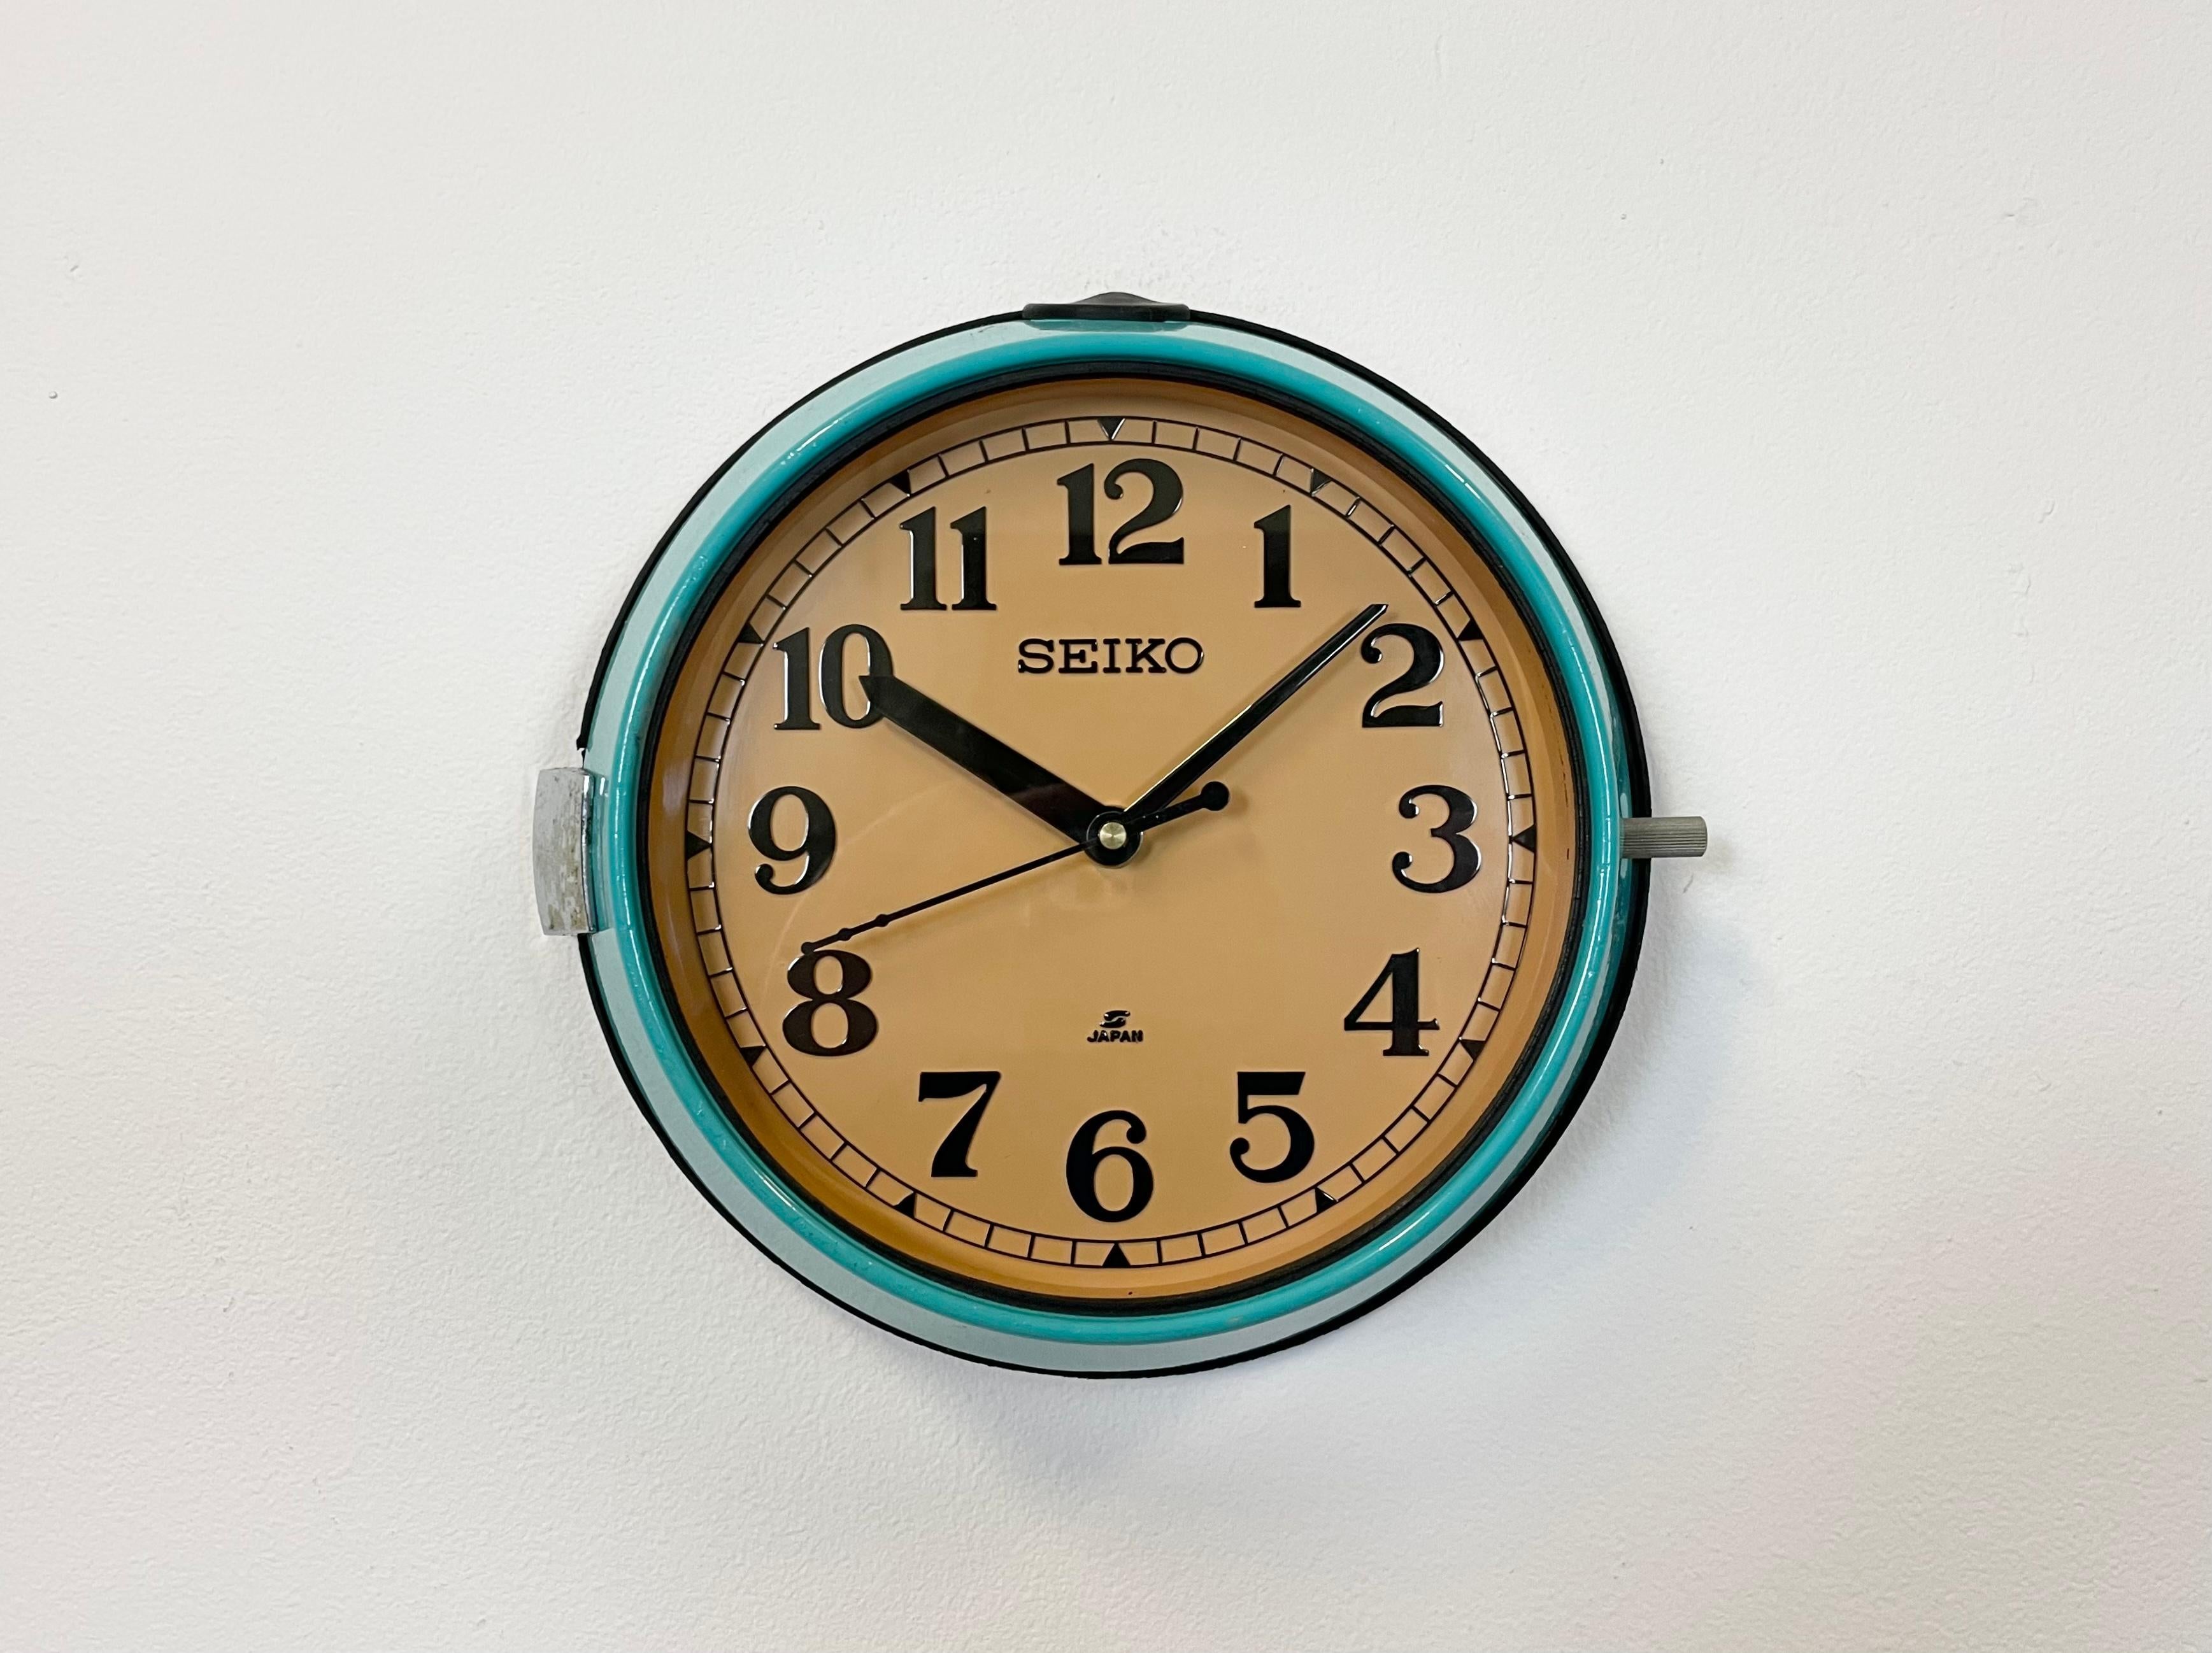 Vintage Seiko navy slave clock designed during the 1970s and produced till 1990s. These clocks were used on large Japanese tankers and cargo ships. It features a turquoise metal frame, a plastic dial and clear glass cover. This item has been